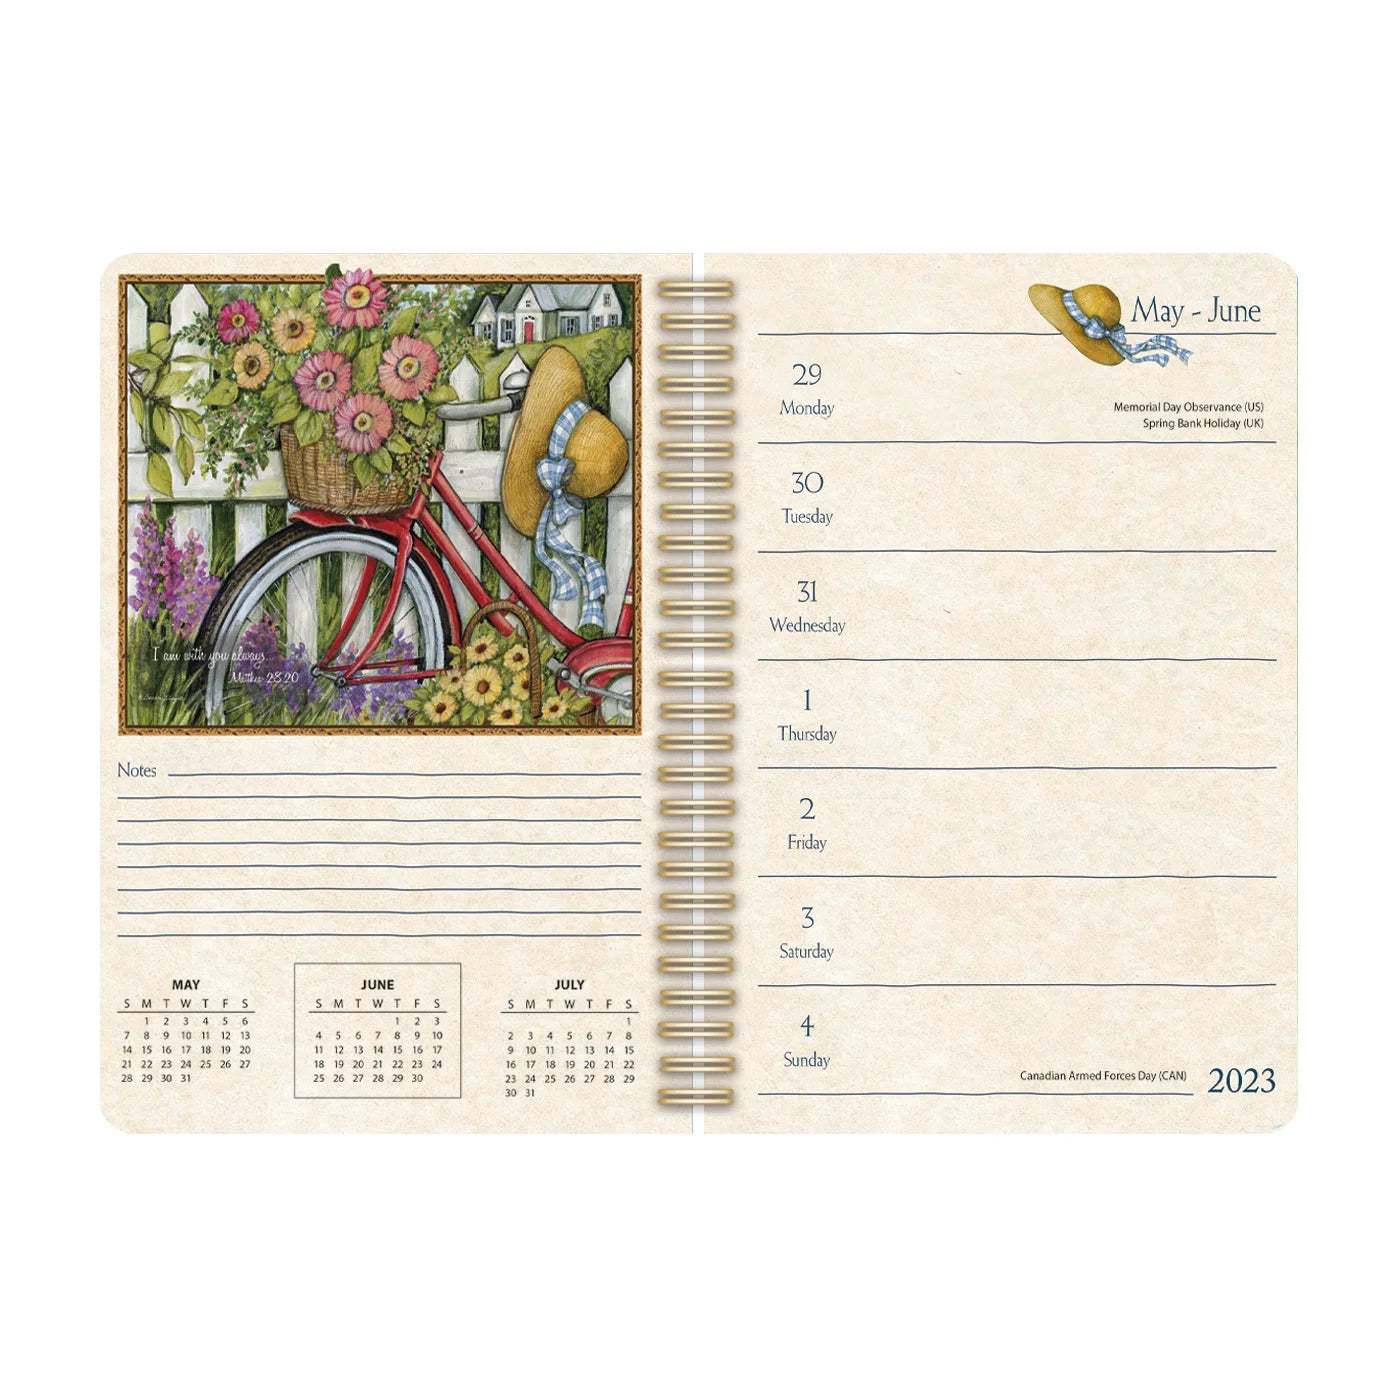 2023 LANG Bountiful Blessings - Monthly Engagement Diary/Planner